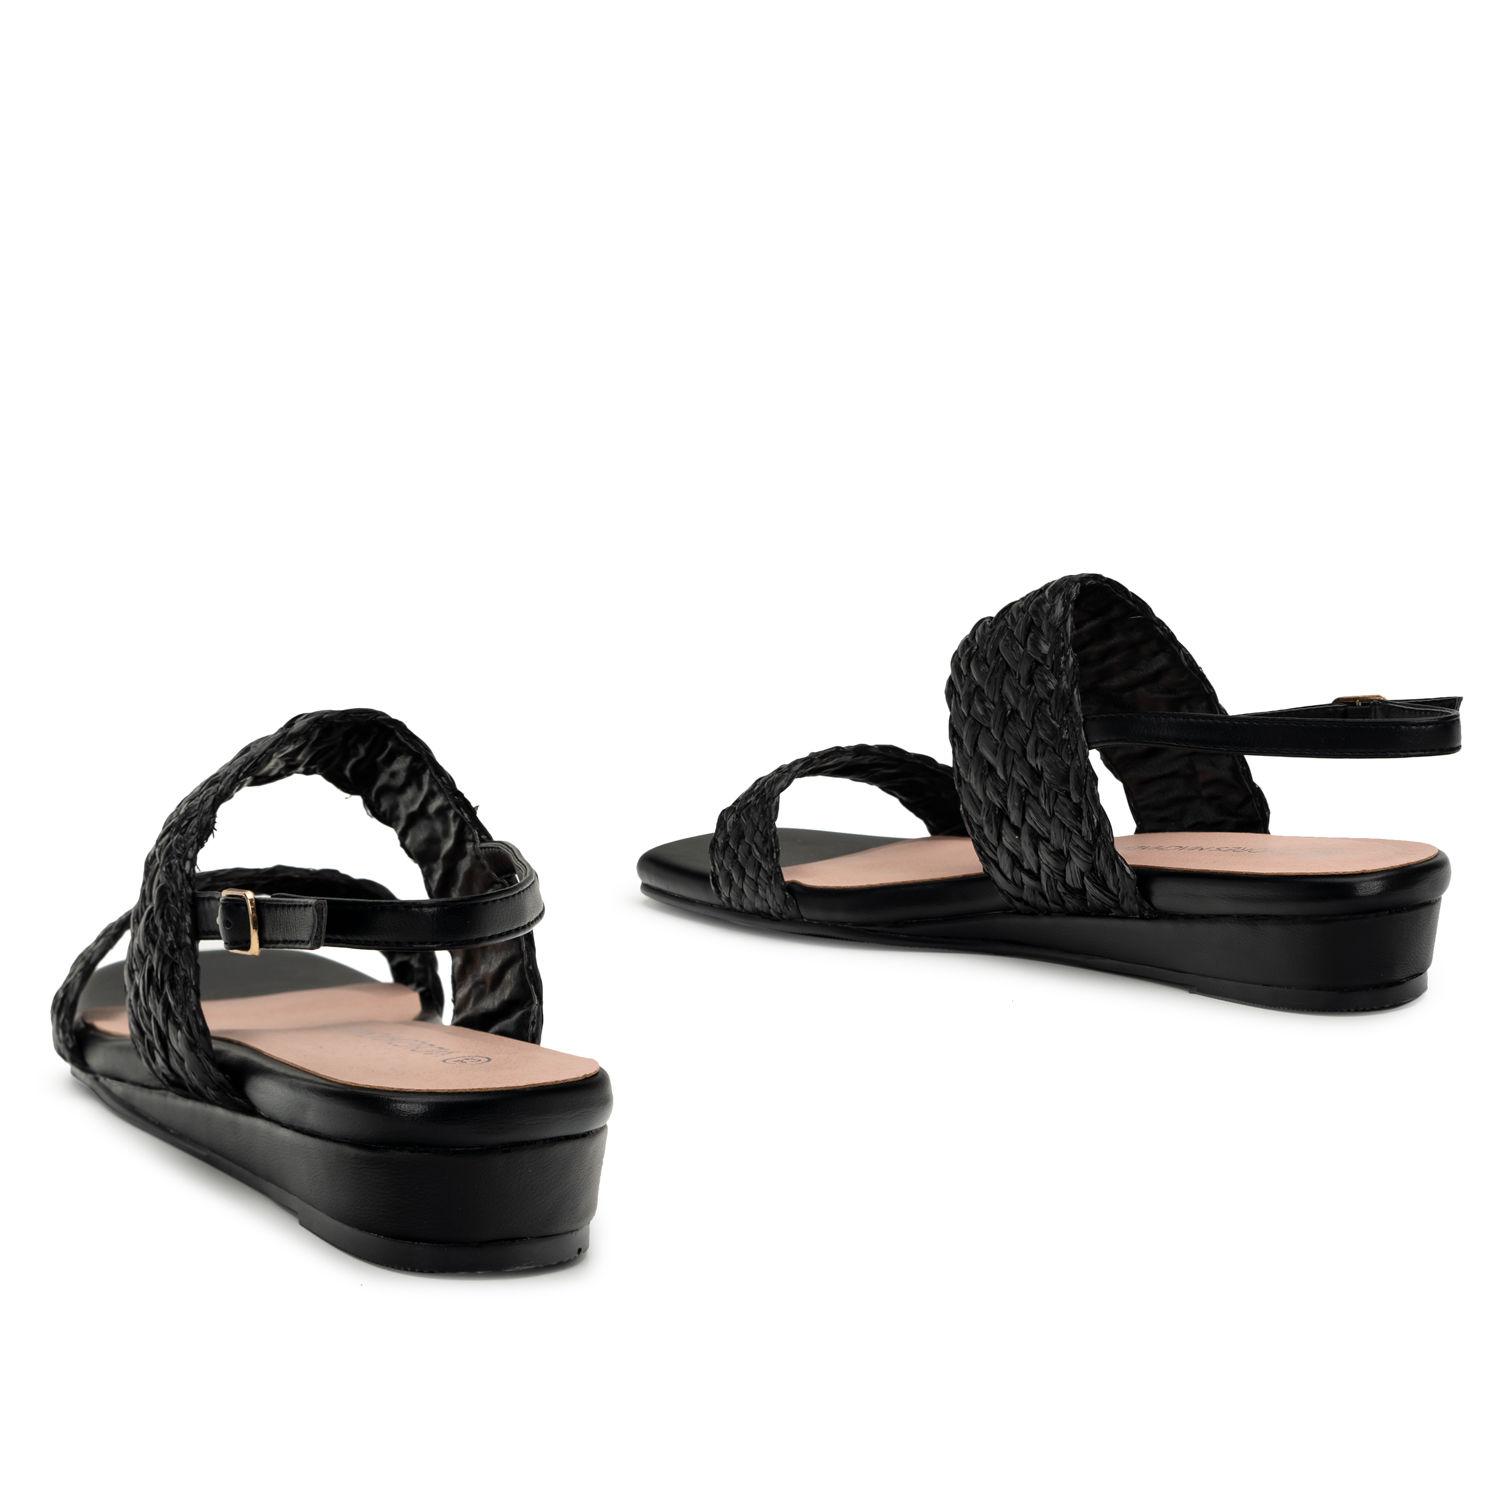 Black Faux Leather Braided Sandals 